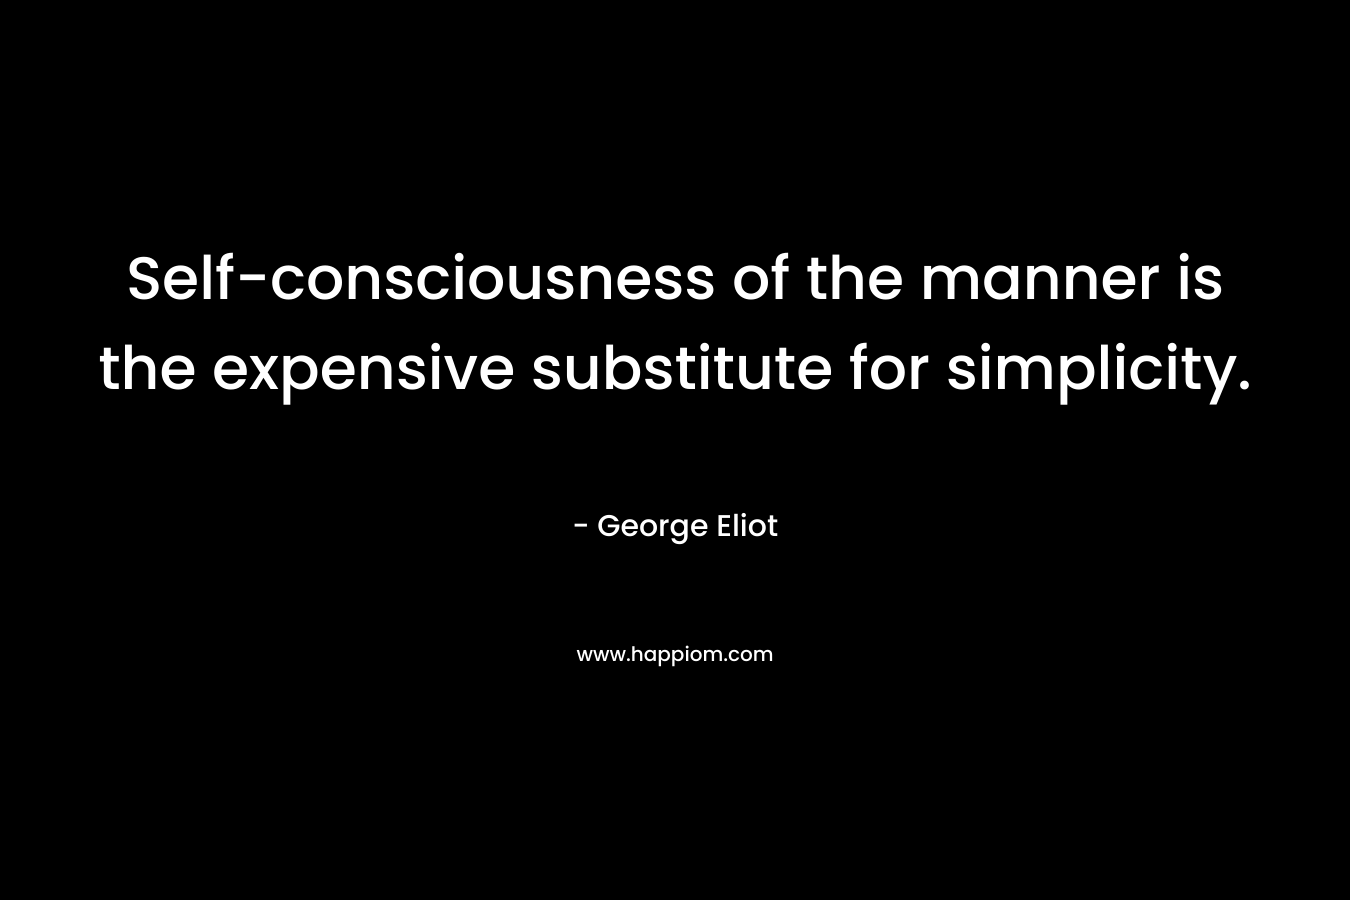 Self-consciousness of the manner is the expensive substitute for simplicity.